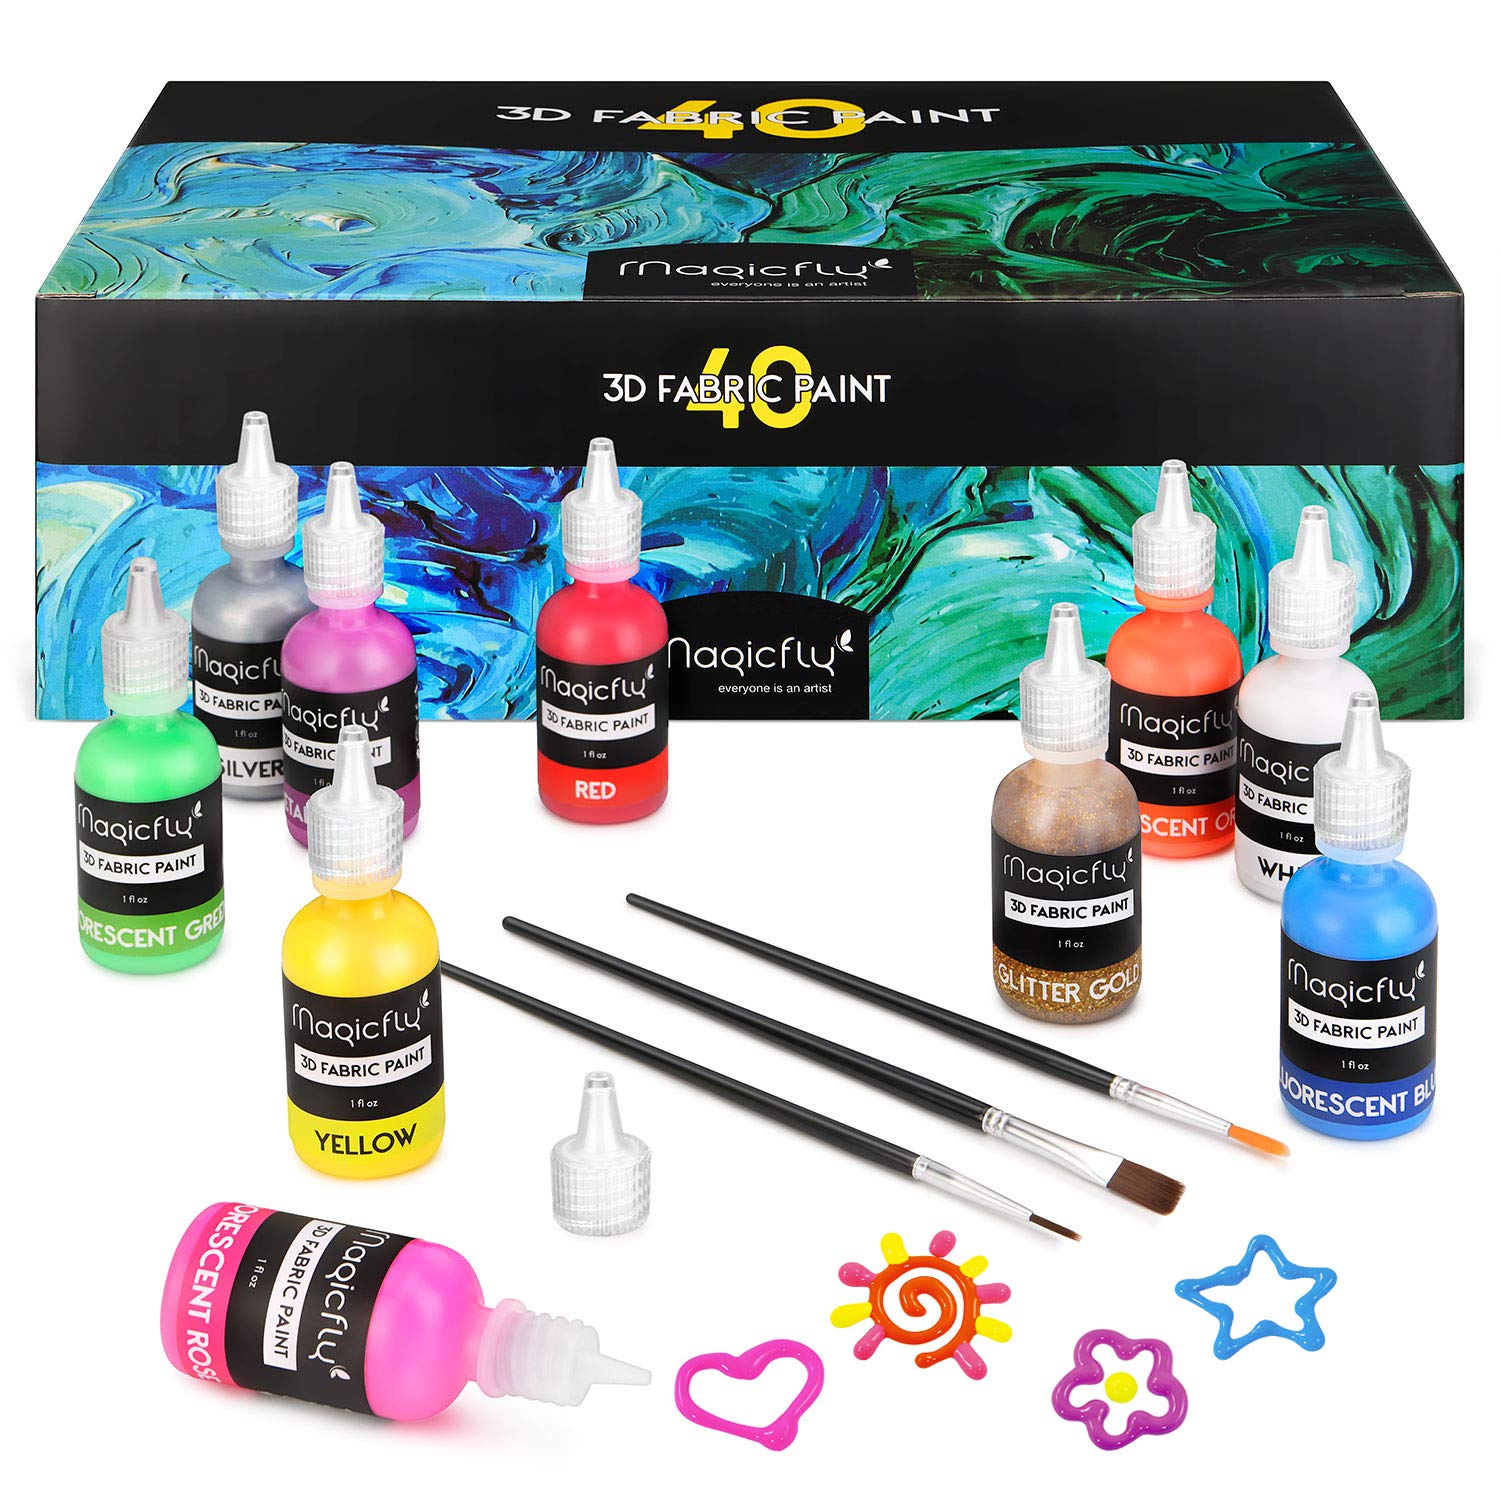 Wholesale 3d puffy paint To Achieve Amazing Works of Art 